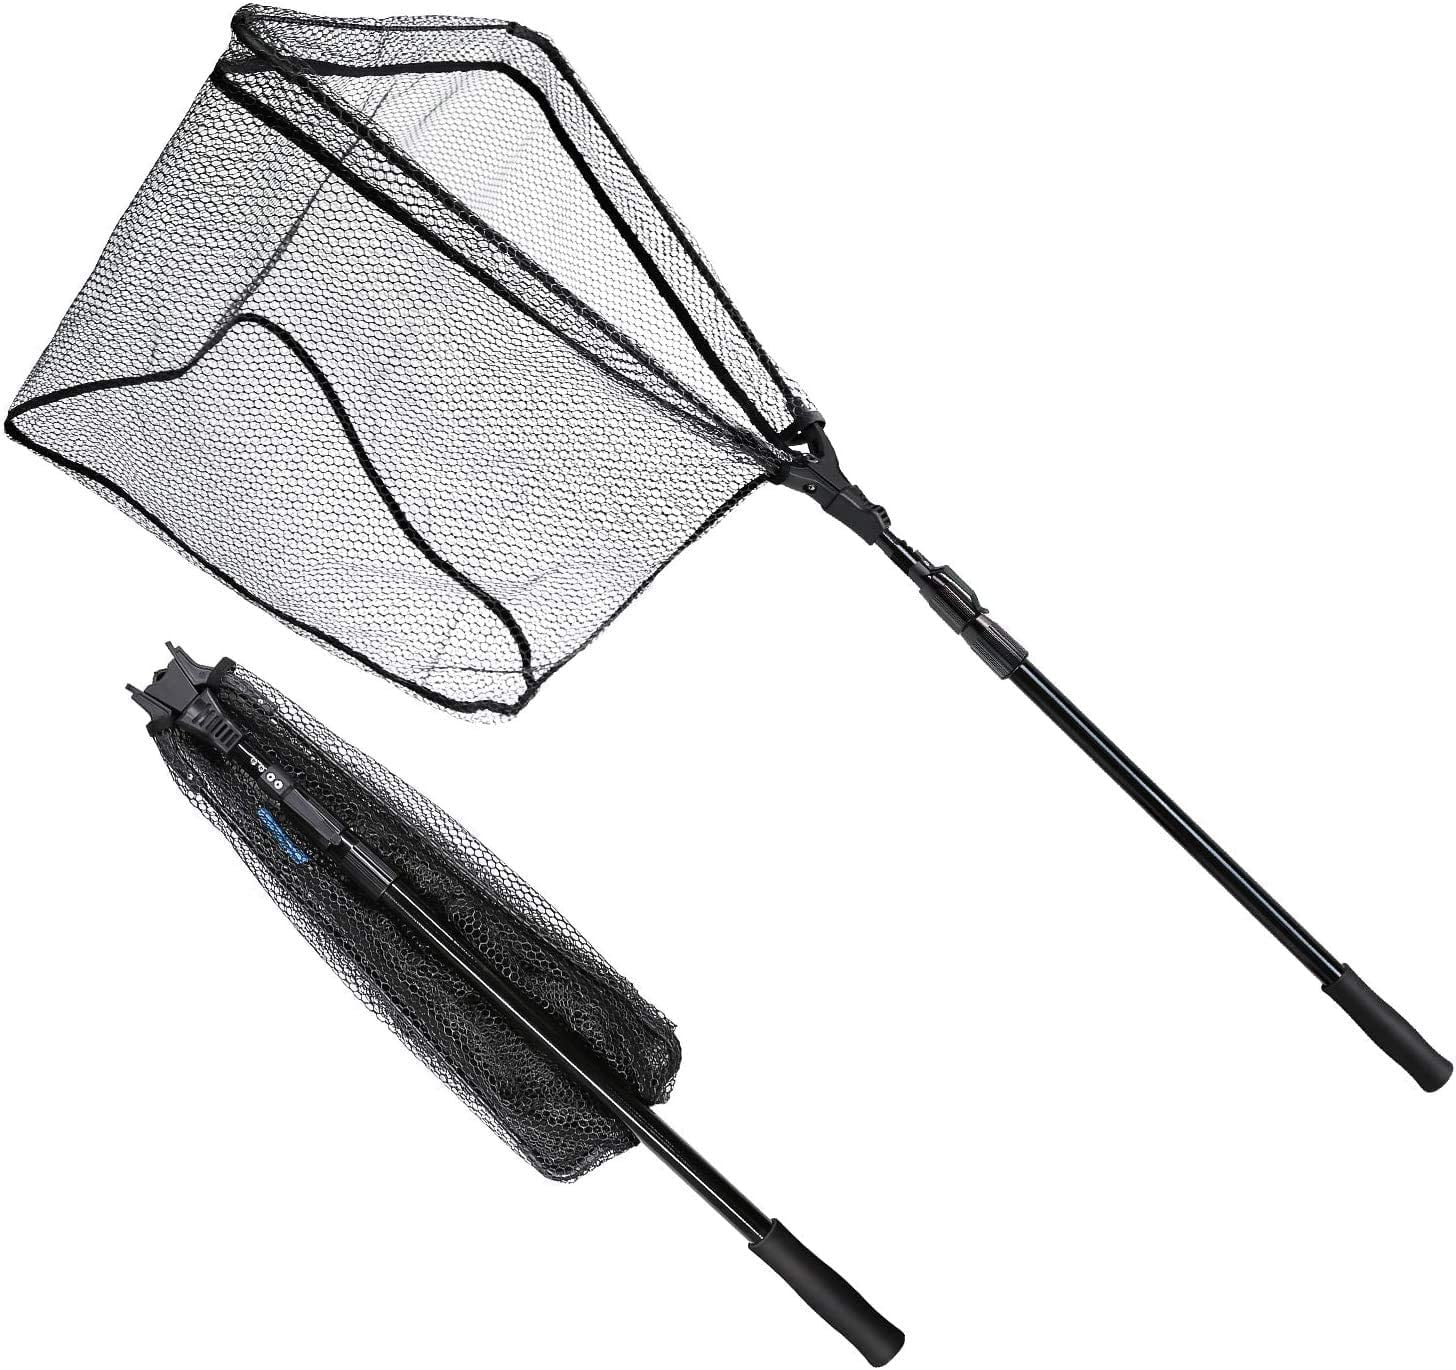 SAN LIKE Fishing Net Fish Landing Nets Folding Telescopic Sturdy Pole  Handle Rubber Coated Net Extending to 98inches for Saltwater